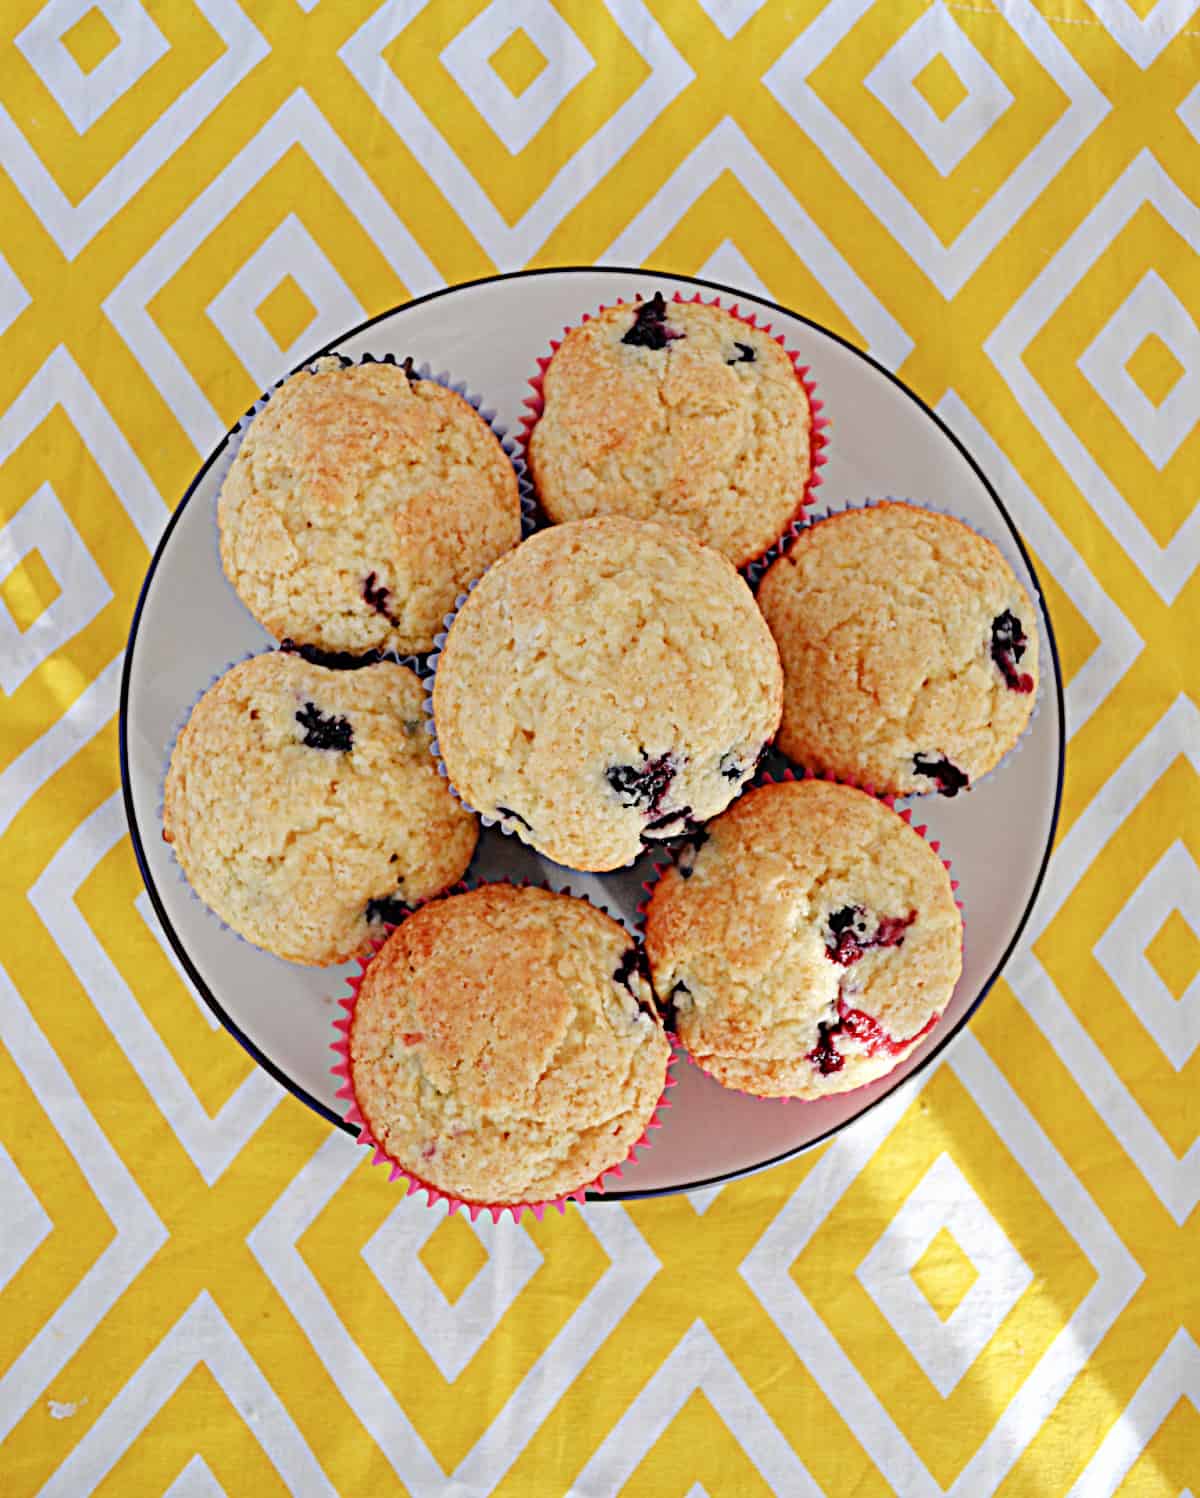 A plate of lemon blueberry muffins.